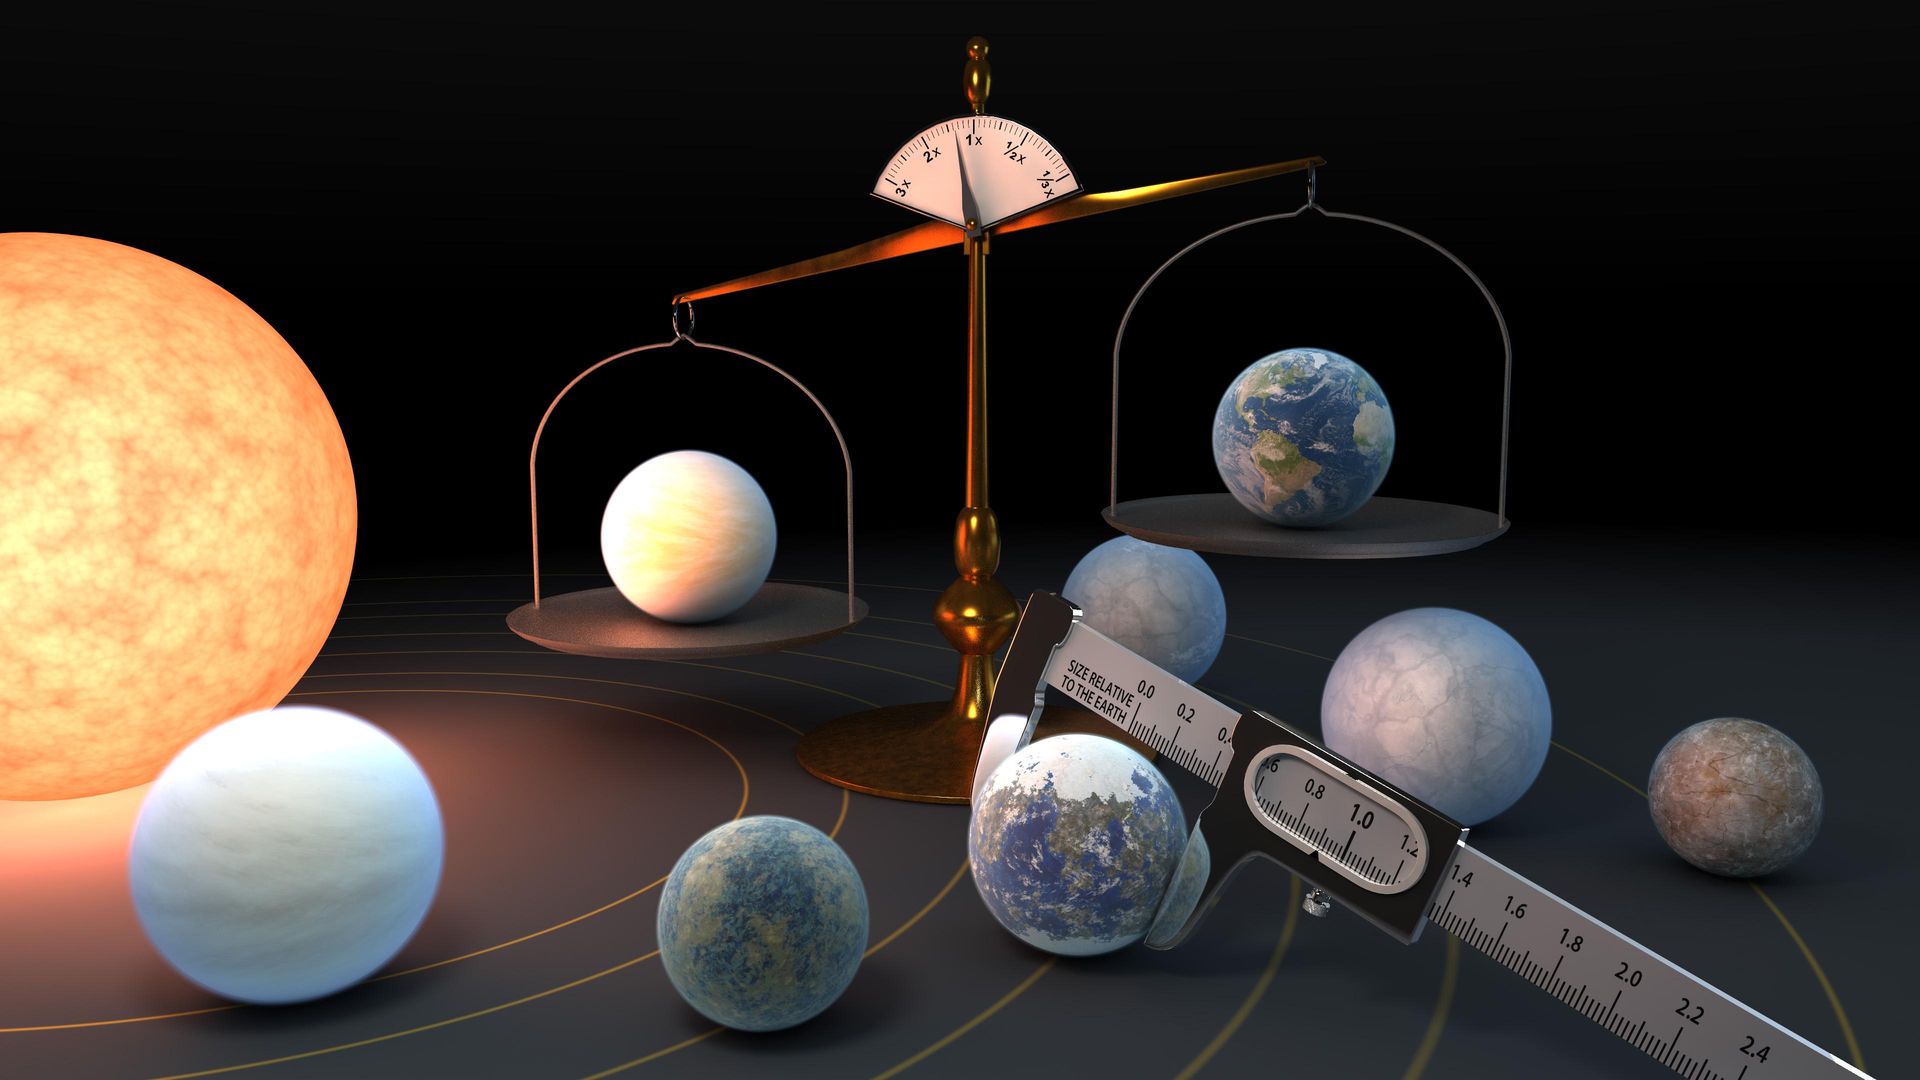 An illustration of seven planets orbiting a red-tinted star. Some of the planets are on a scale.